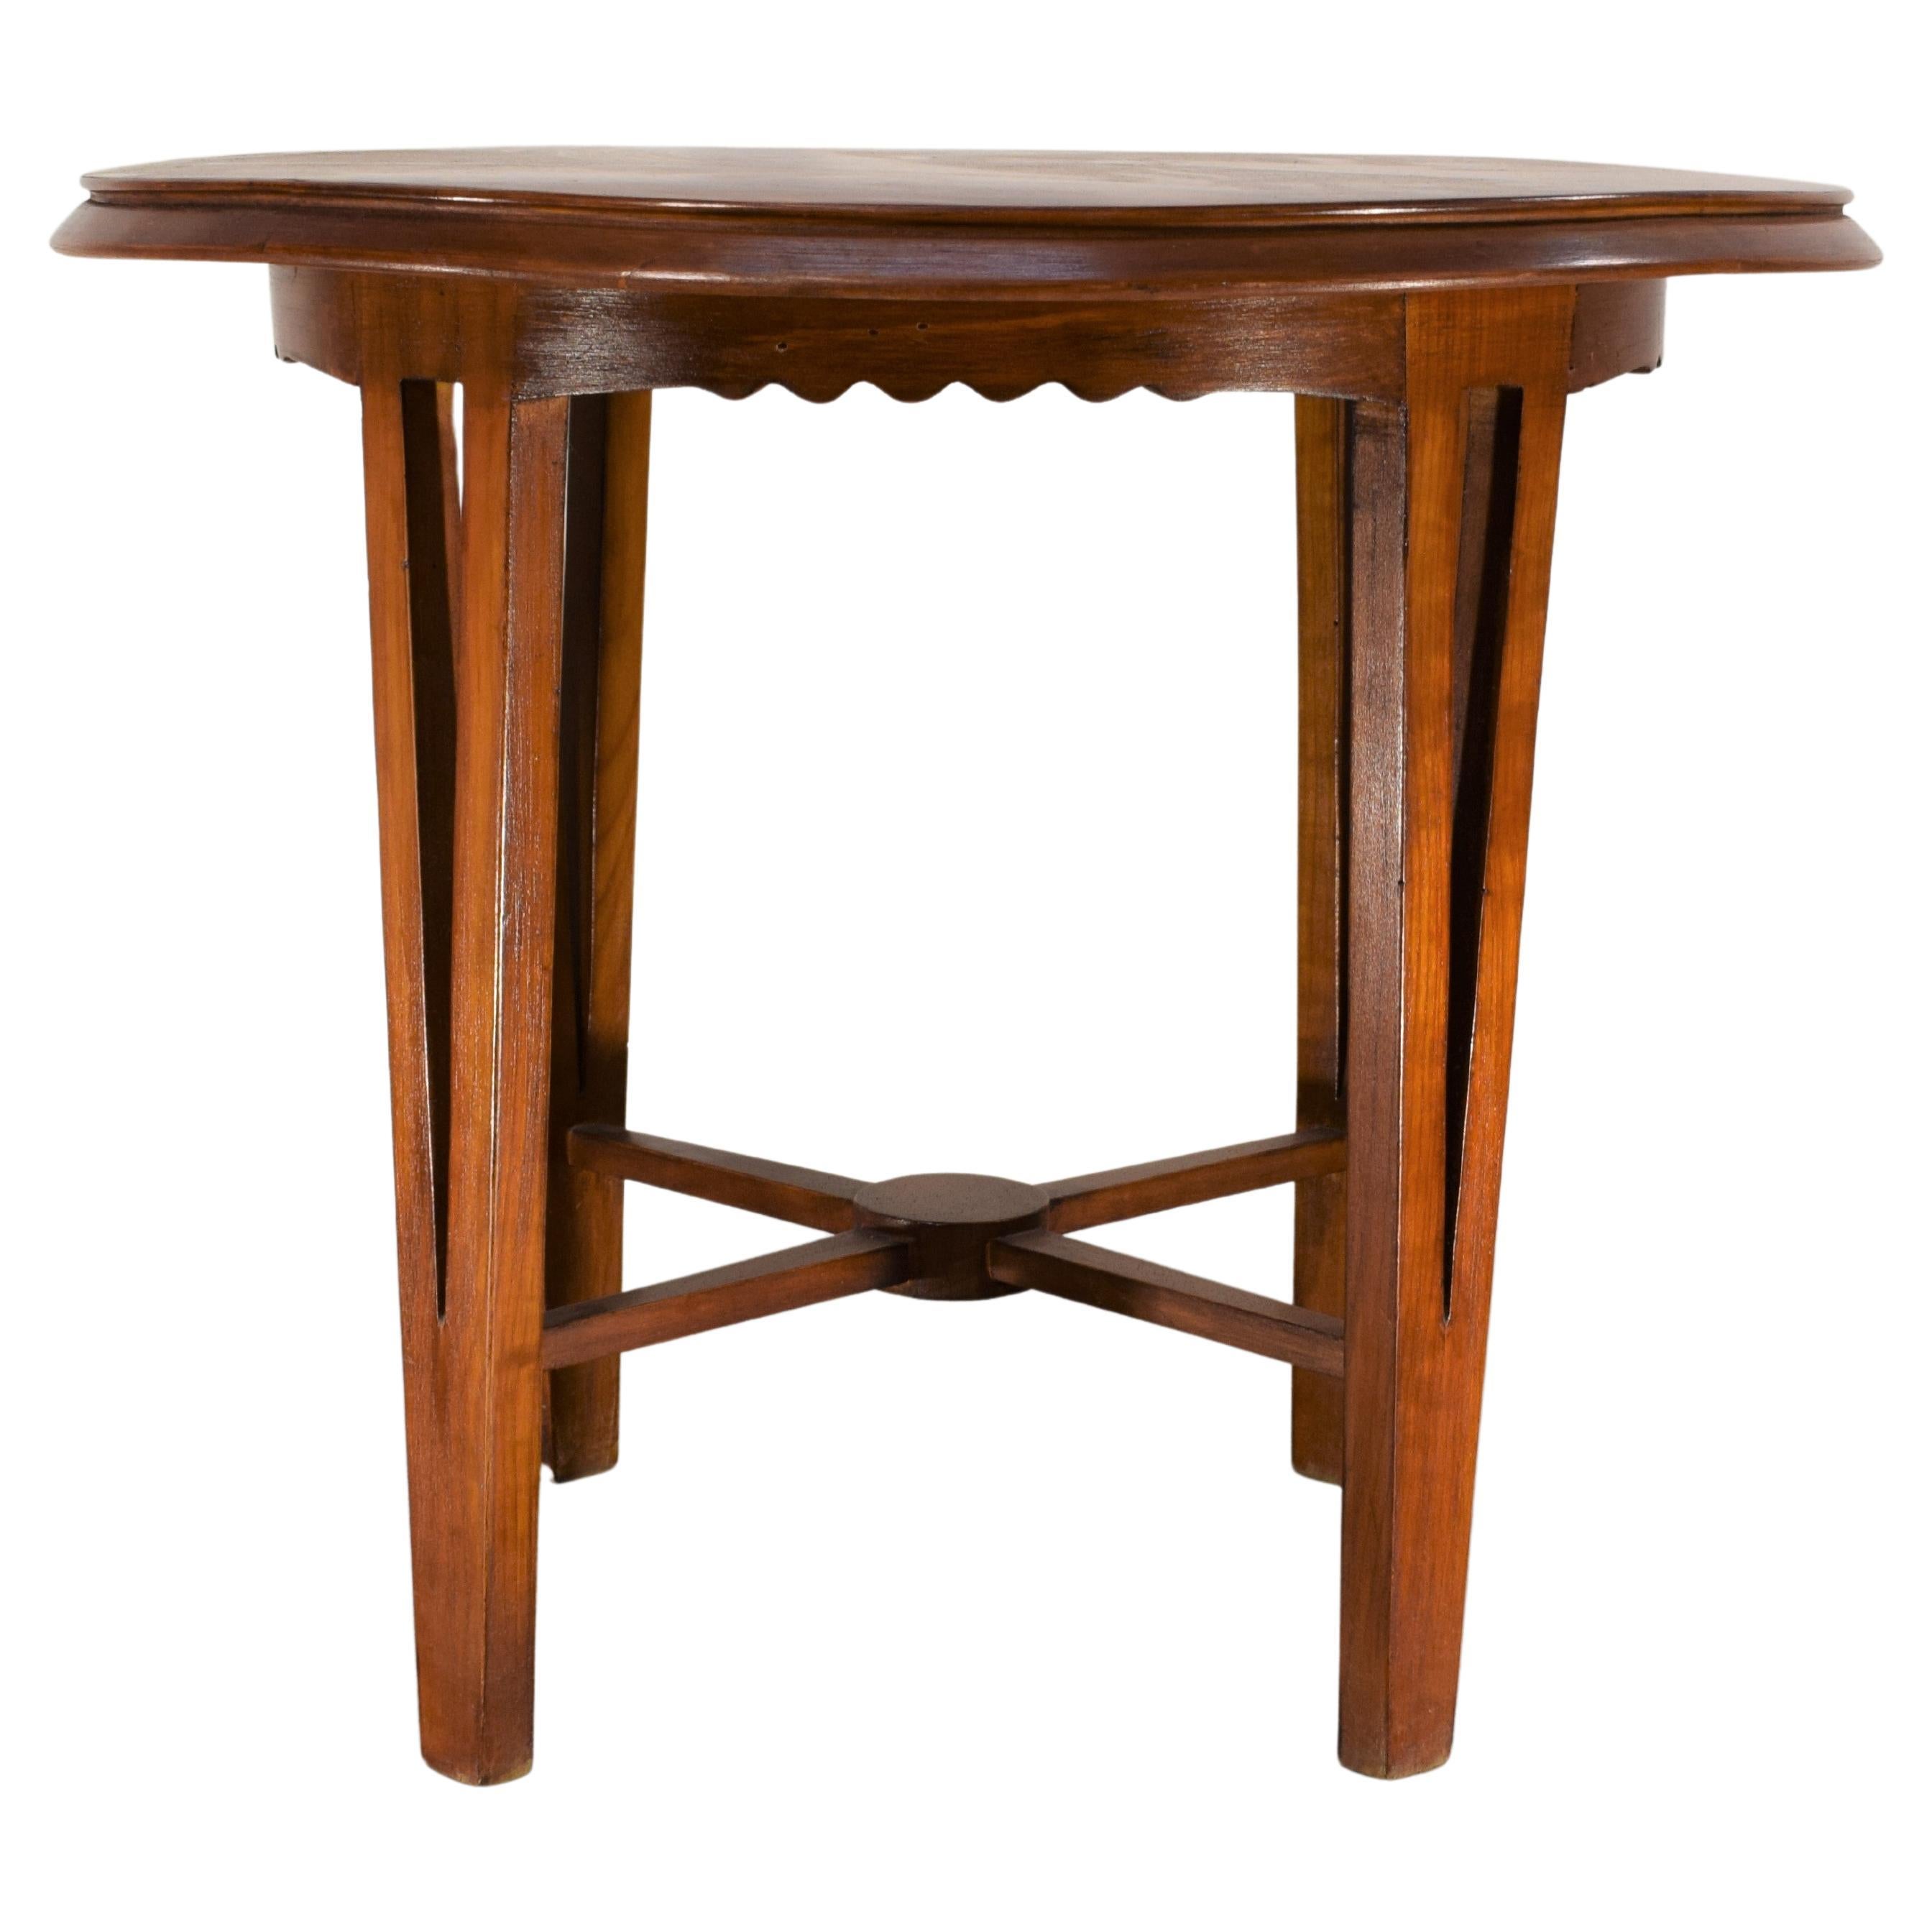 Table basse ronde italienne, années 1940.